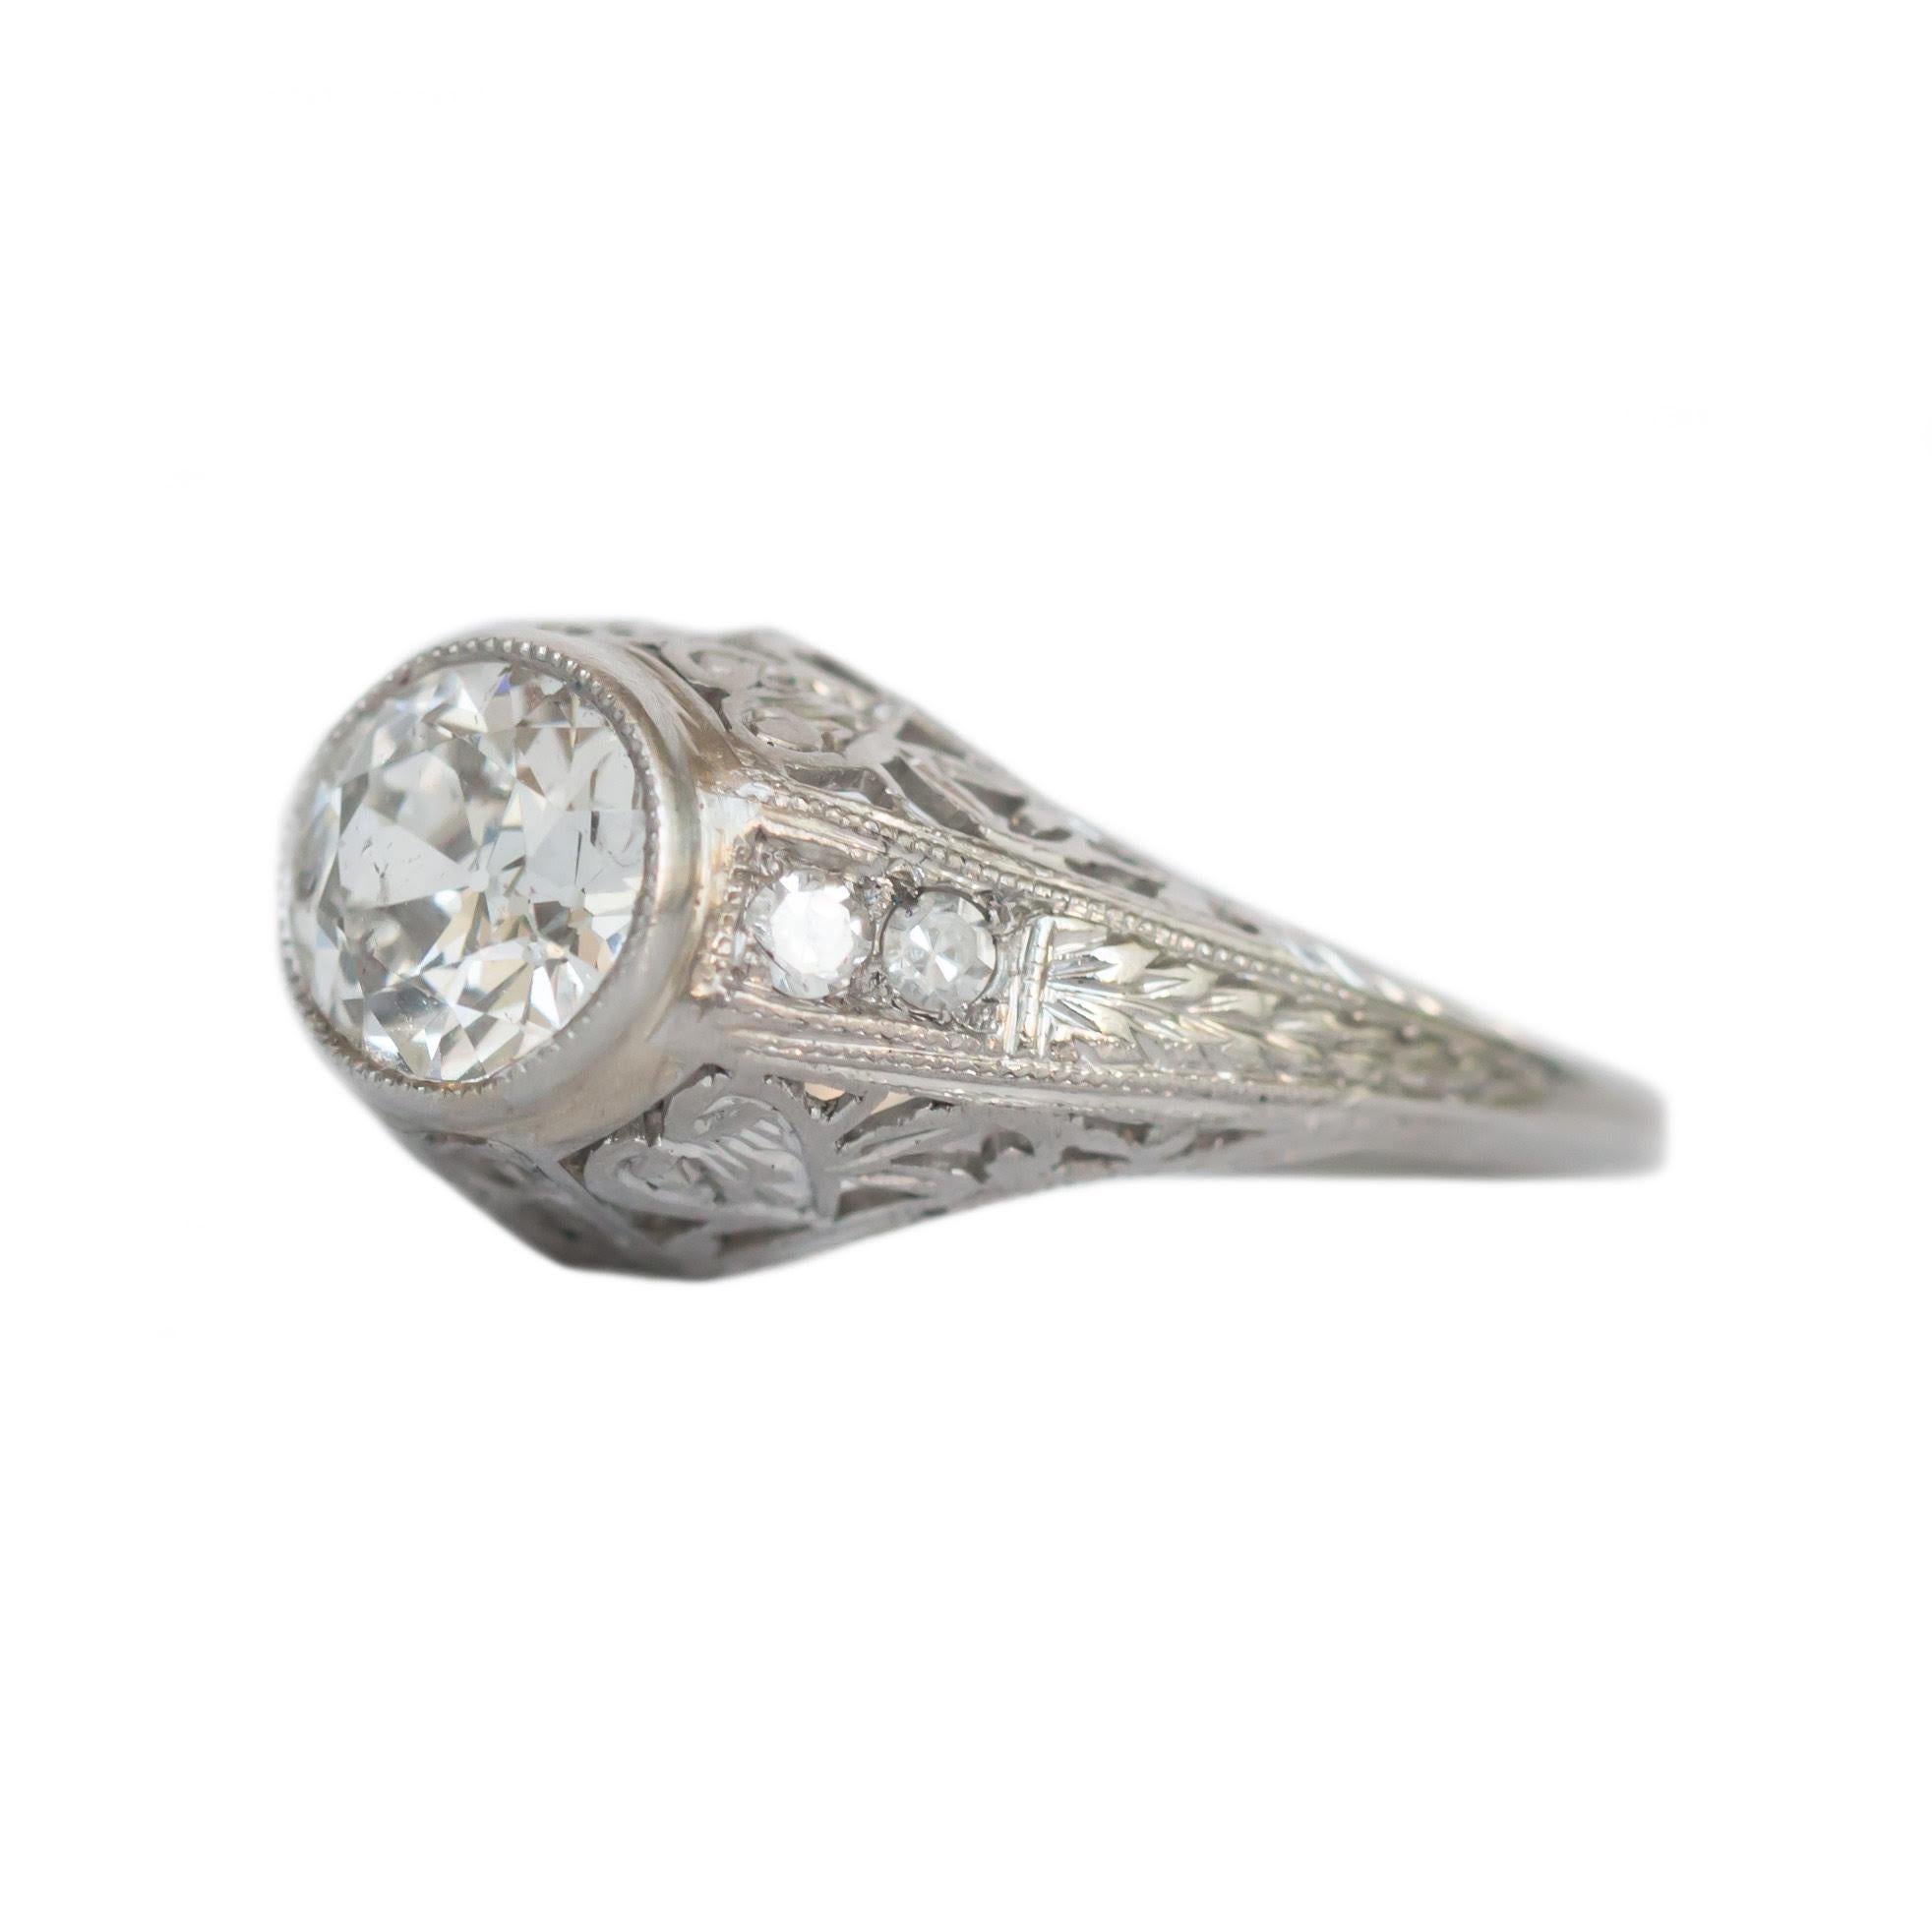 Here we have an beautiful example of an Art Deco era engagement ring! This genuine 1920's ring features a brilliant .94 Carat Old European cut diamond set beautifully in a highly detailed platinum ring. The beautifully crafted platinum ring is